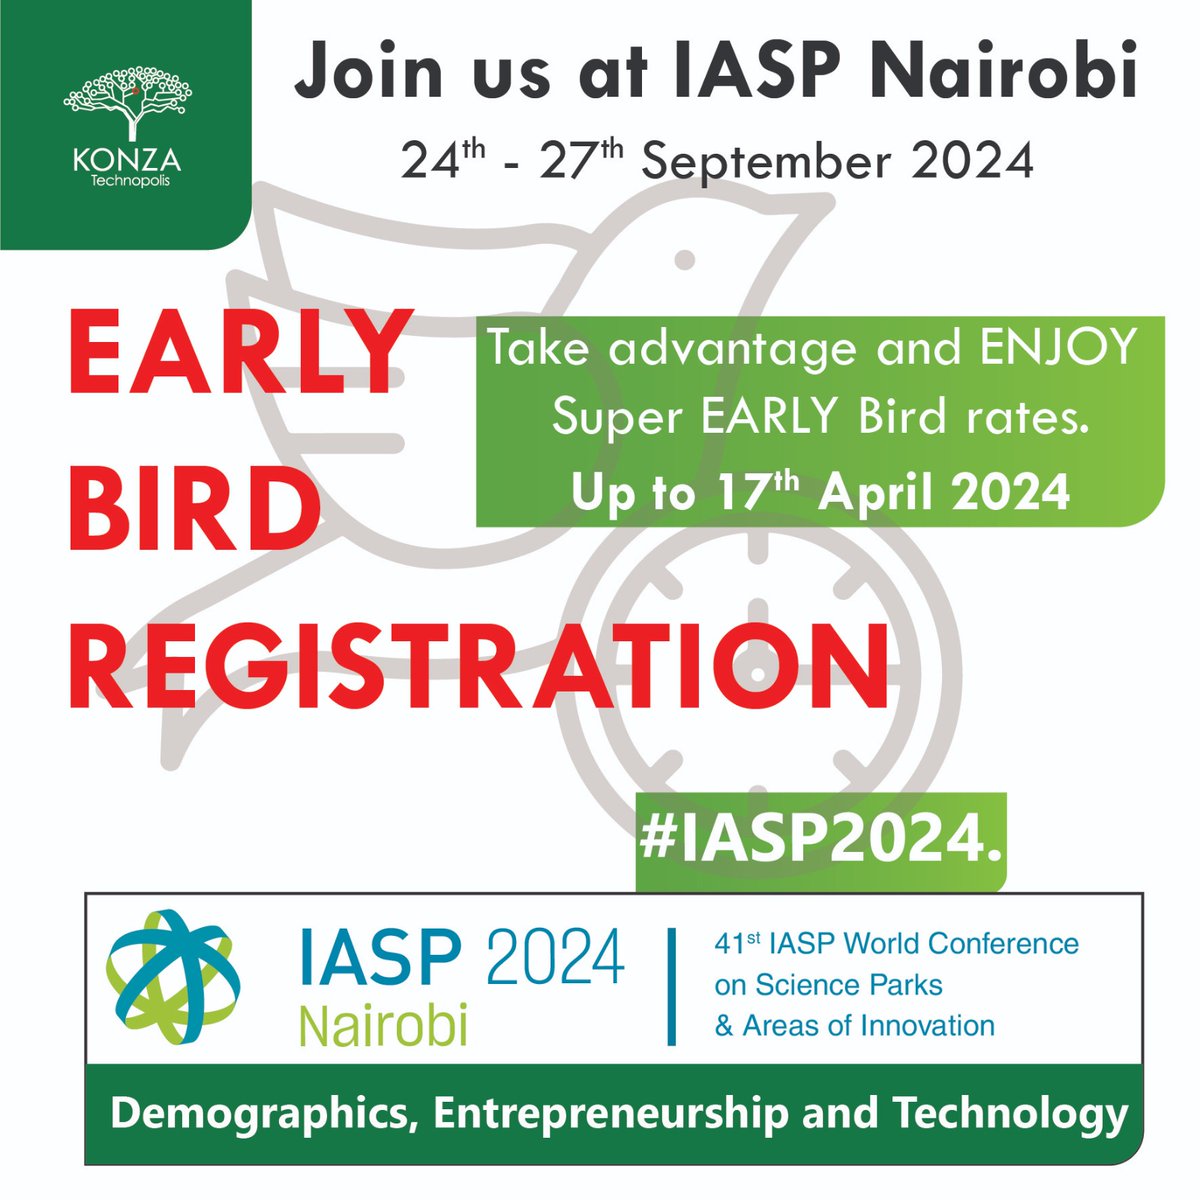 The early bird gets the worm (and the discount)! Register early for #IASP2024 in Kenya and save on your ticket! Offer ends April 17th! iaspworldconference.com #LetsGoToKenya #SiliconSavannah @konzatech @MoICTKenya @ICTAuthorityKE @ODPC_KE @Nacosti